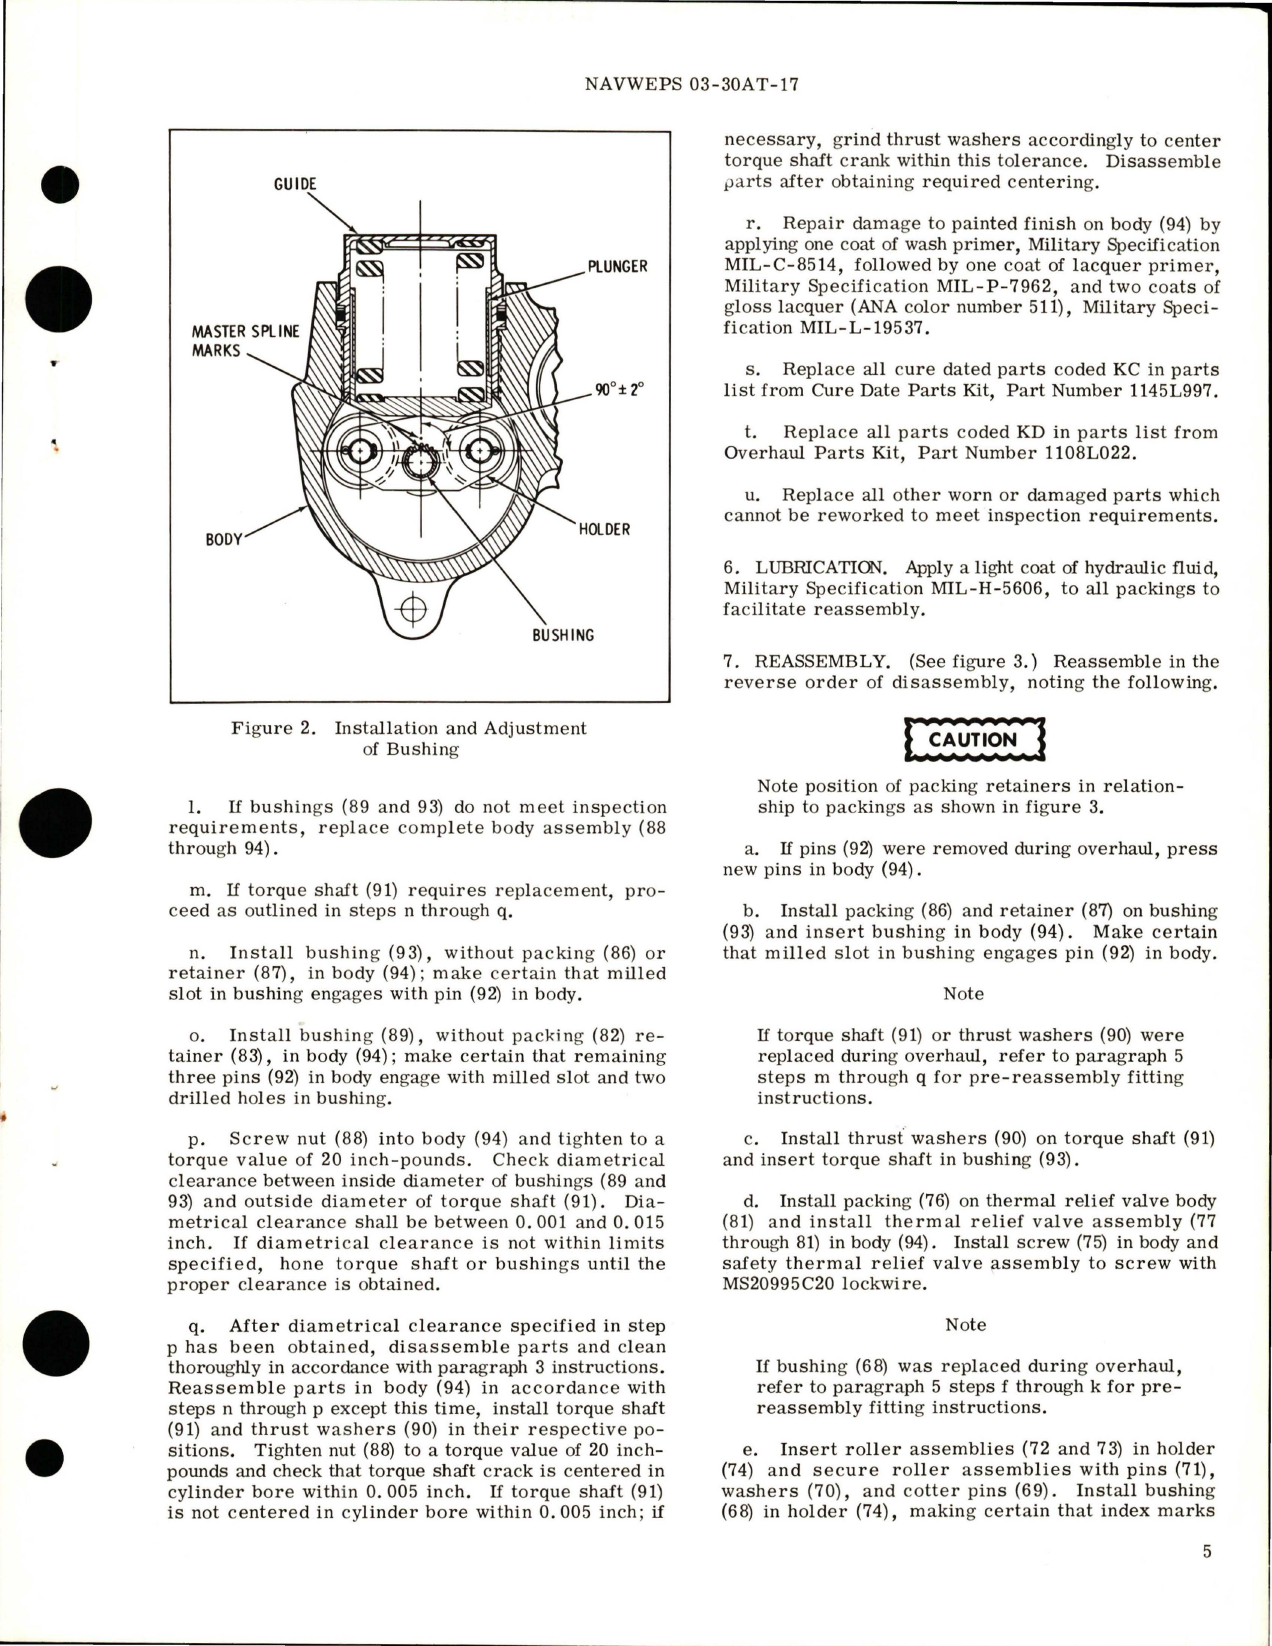 Sample page 7 from AirCorps Library document: Overhaul Instructions with Parts Breakdown for Shimmy Damper - Parts 1145L000-500 and 1145L000-501 